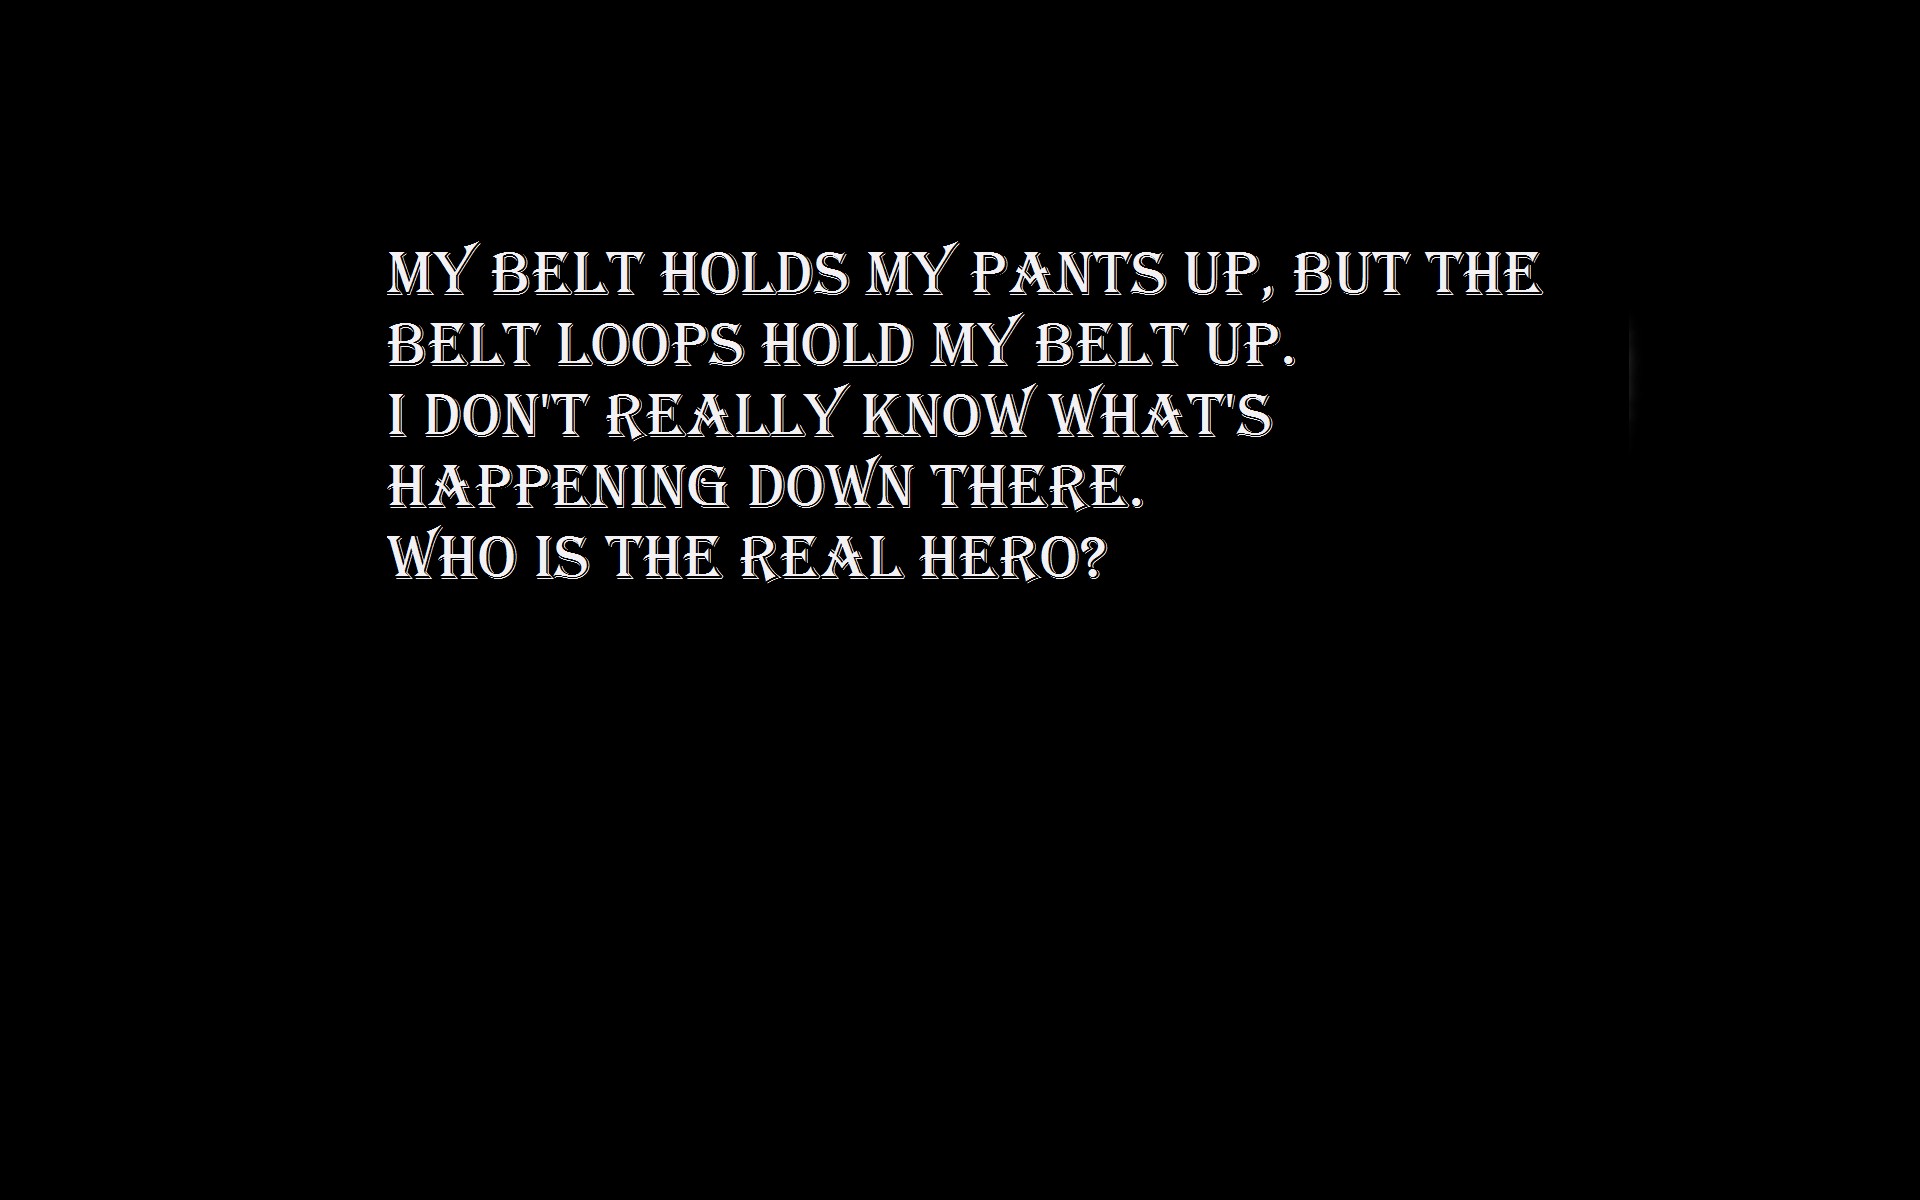 belt, Pants, Black, Bw, Quotes, Humor, Funny, Wtf, Statements Wallpaper